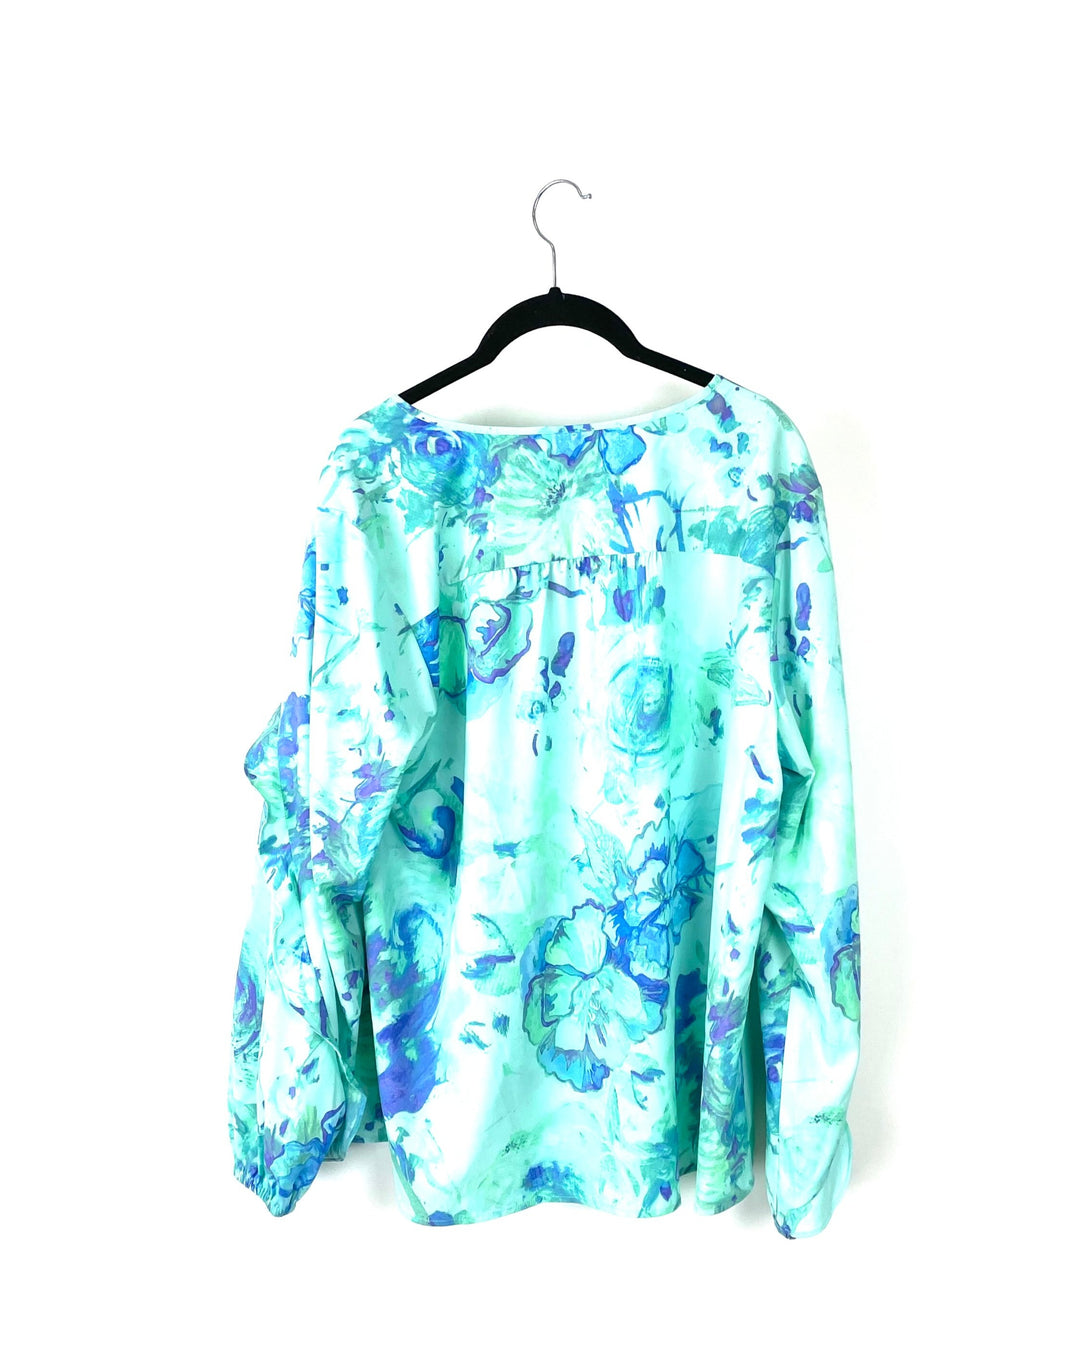 Watercolor Floral Print Long Sleeve Top - Large/Extra Large